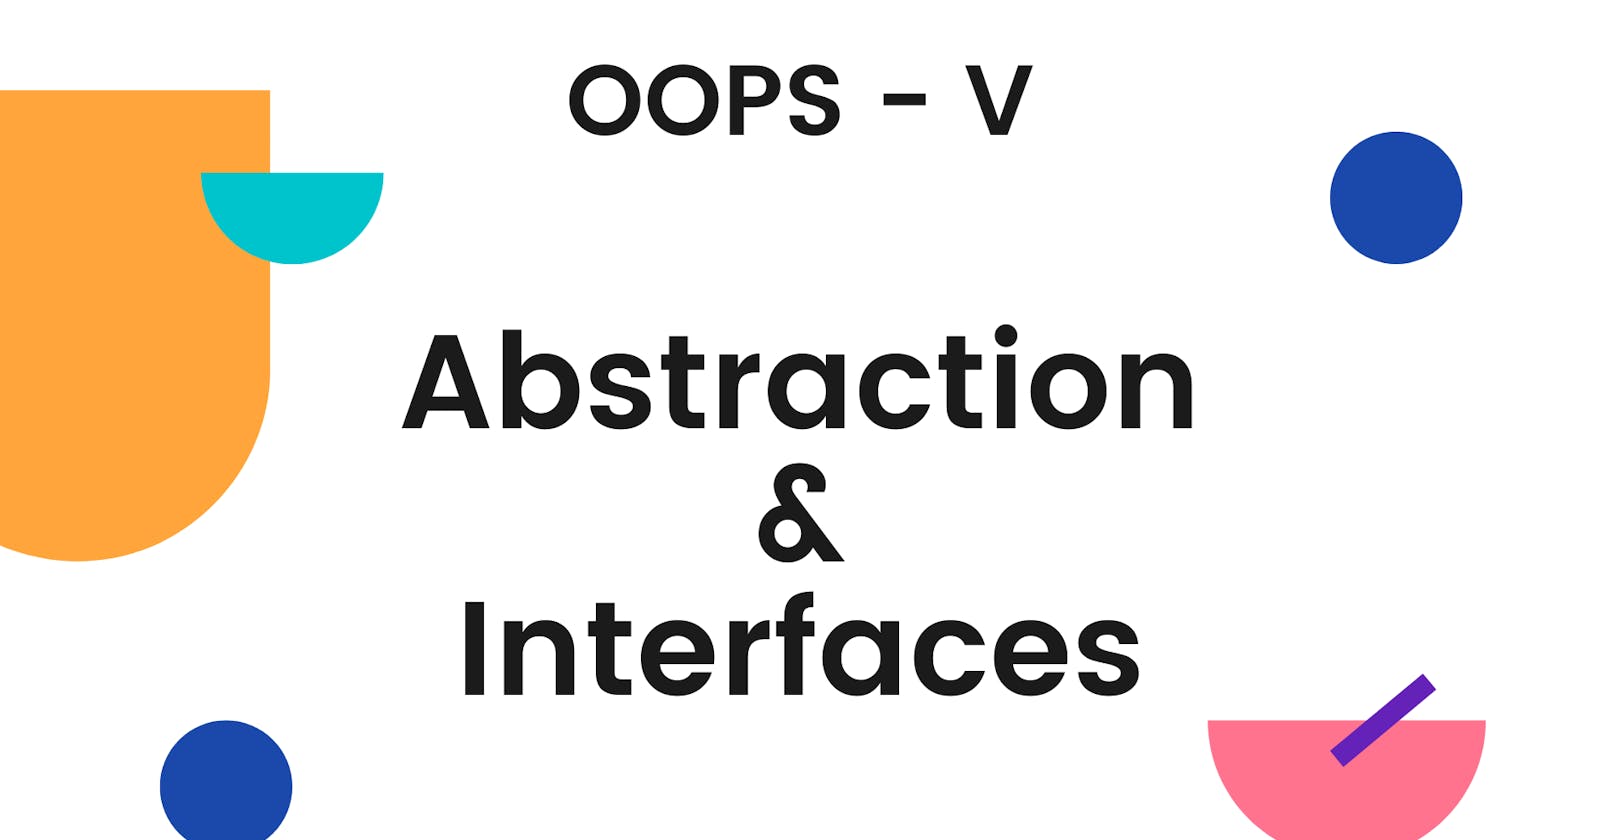 [OOPS 5] Abstraction and Interfaces